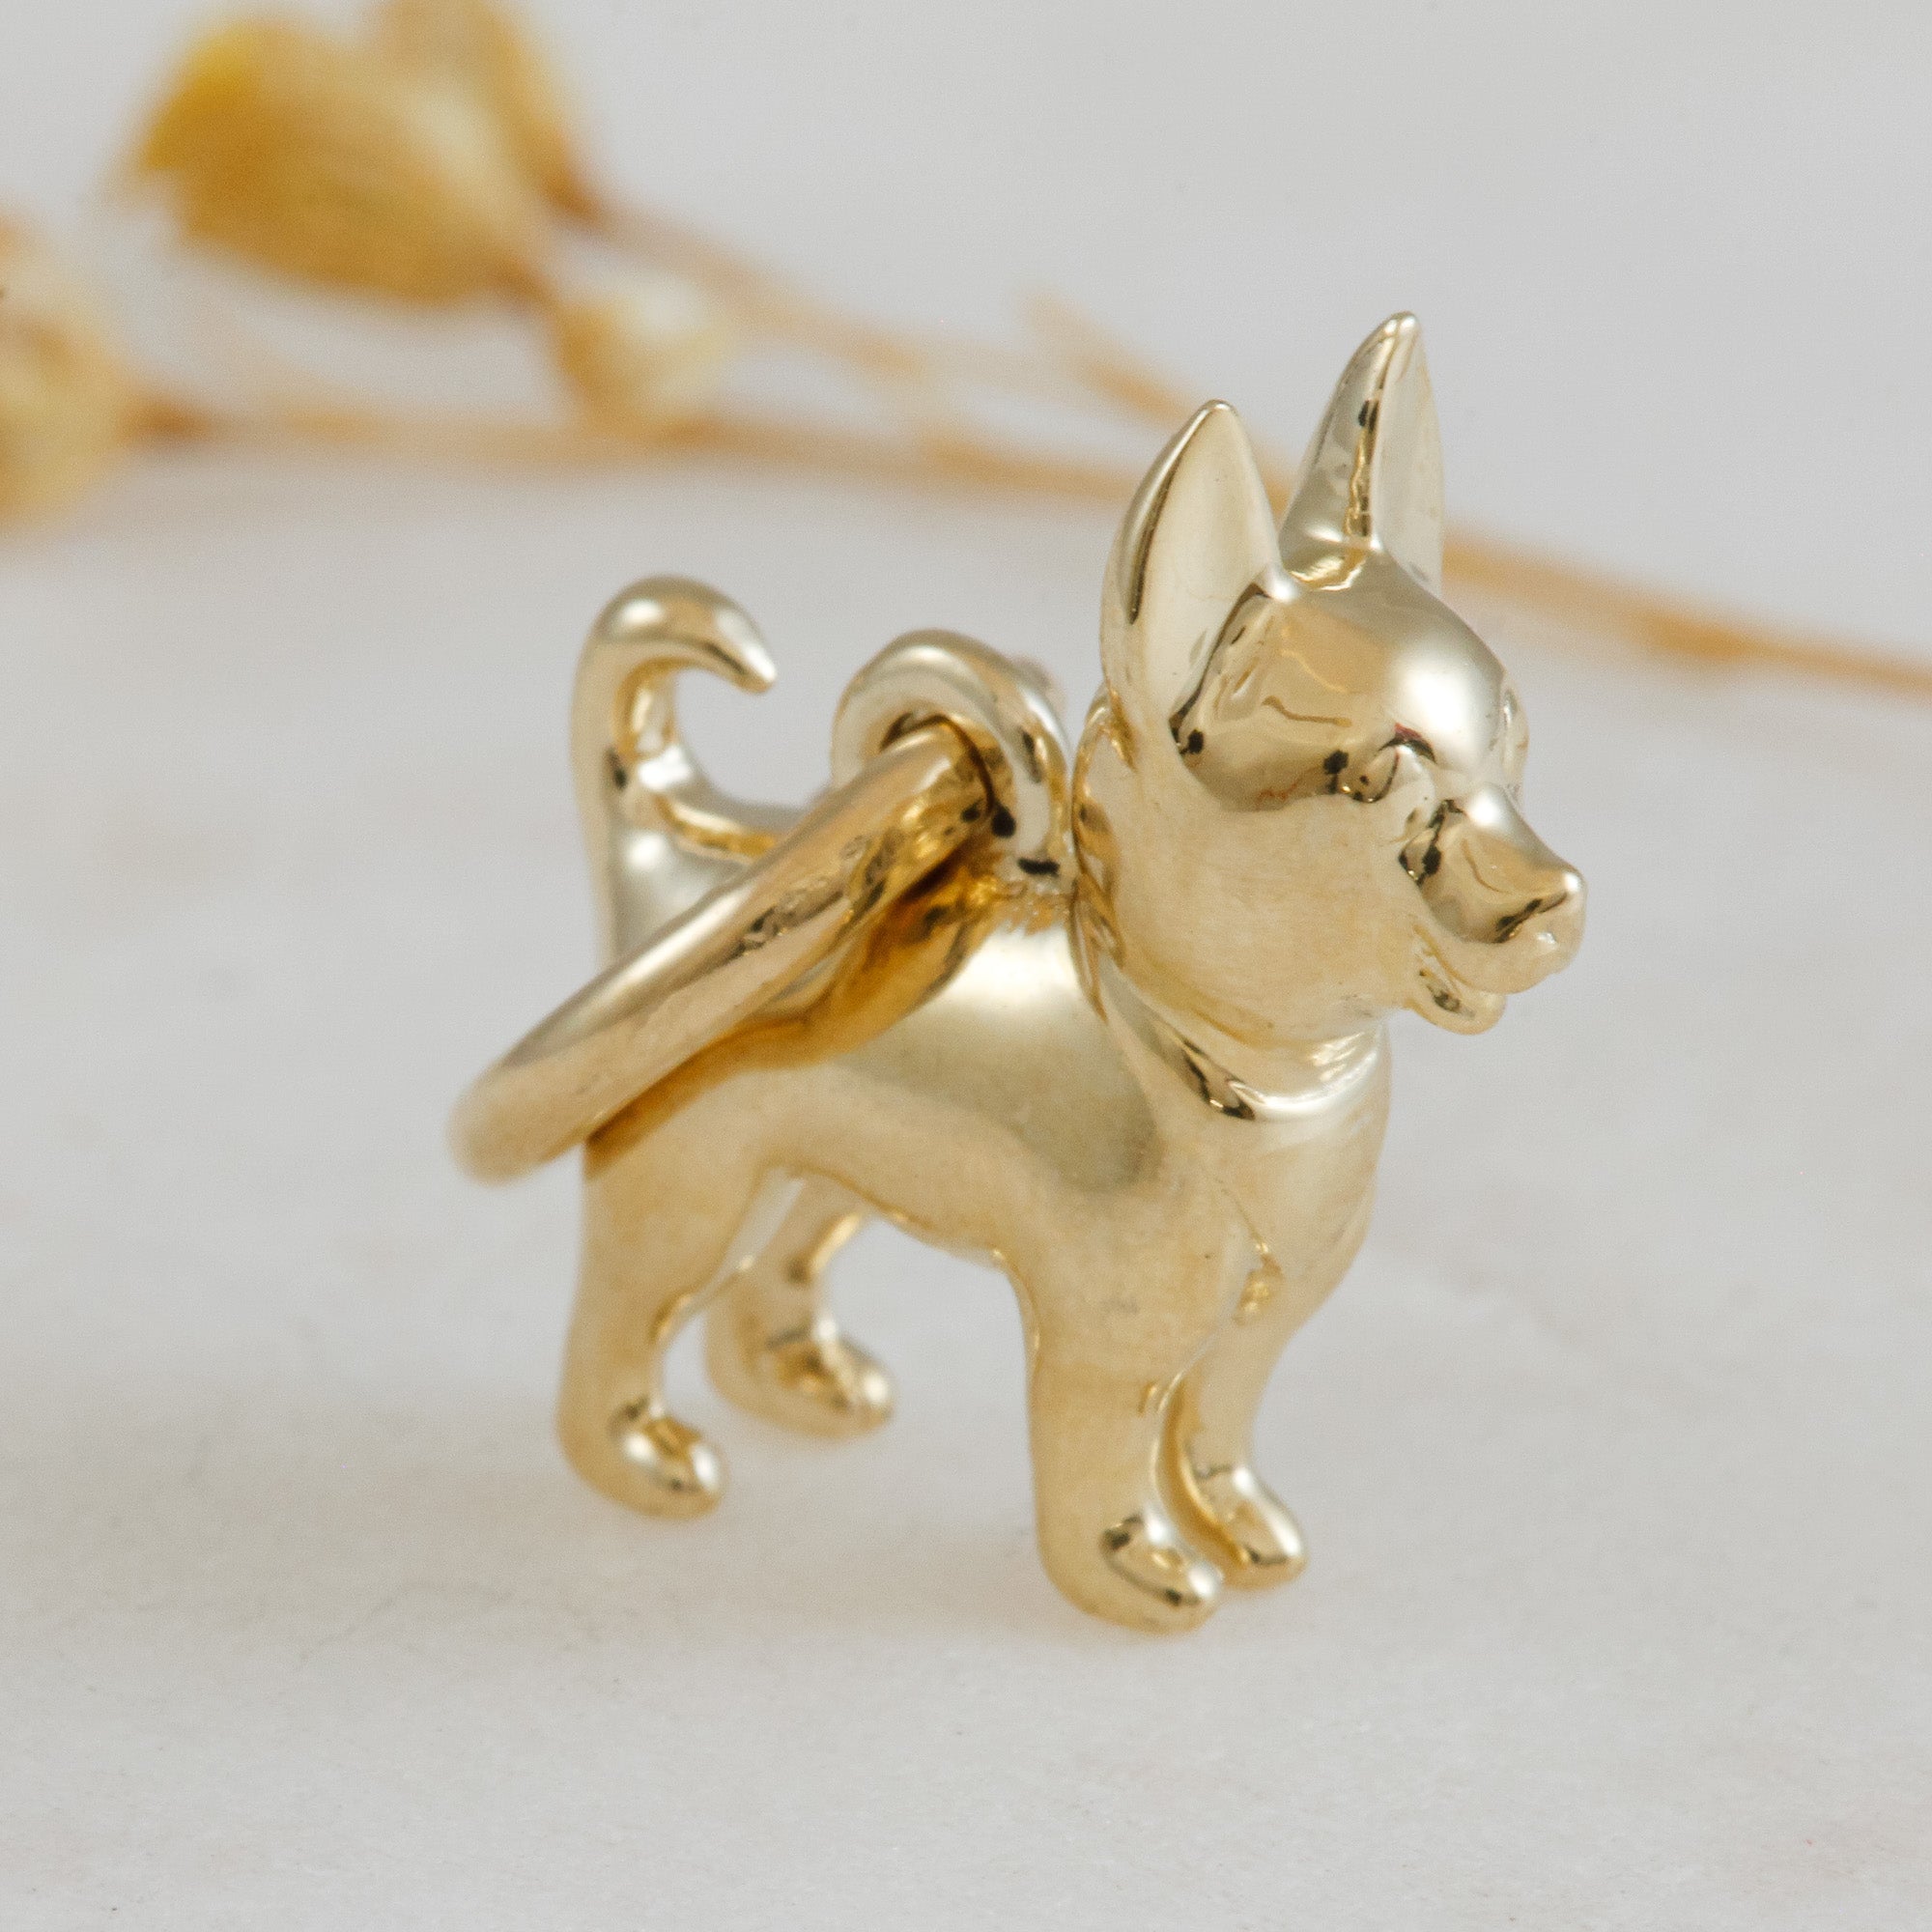 chihuahua solid gold dog charm for a necklace or bracelet